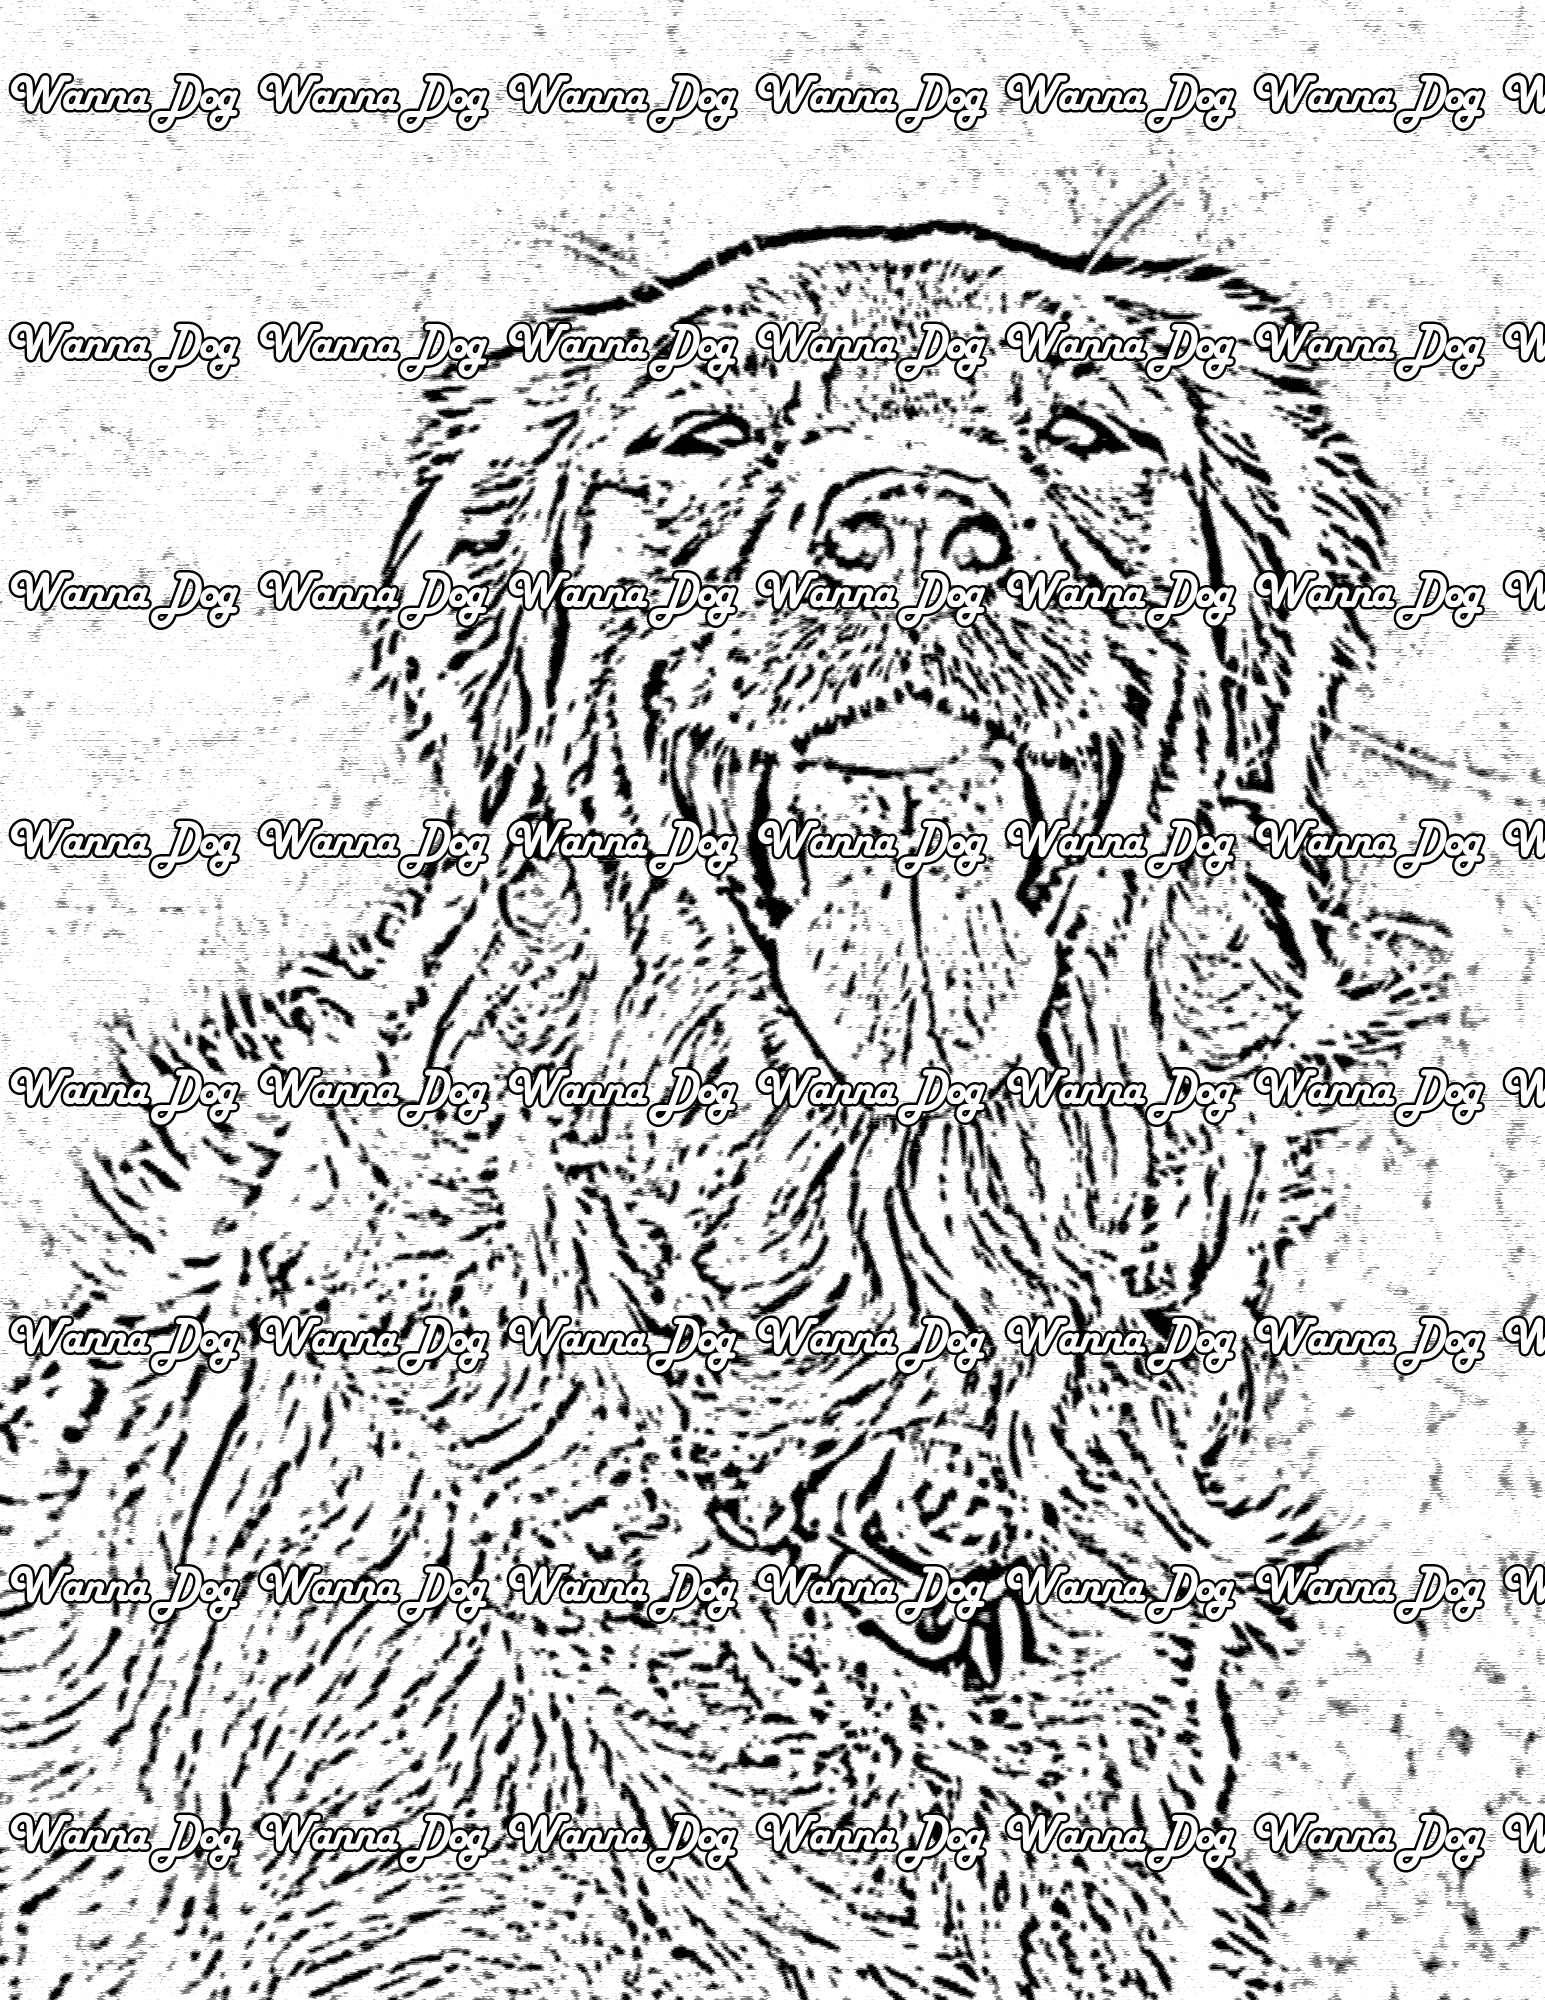 Golden Retriever Coloring Page of a Golden Retriever in a field with their tongue out